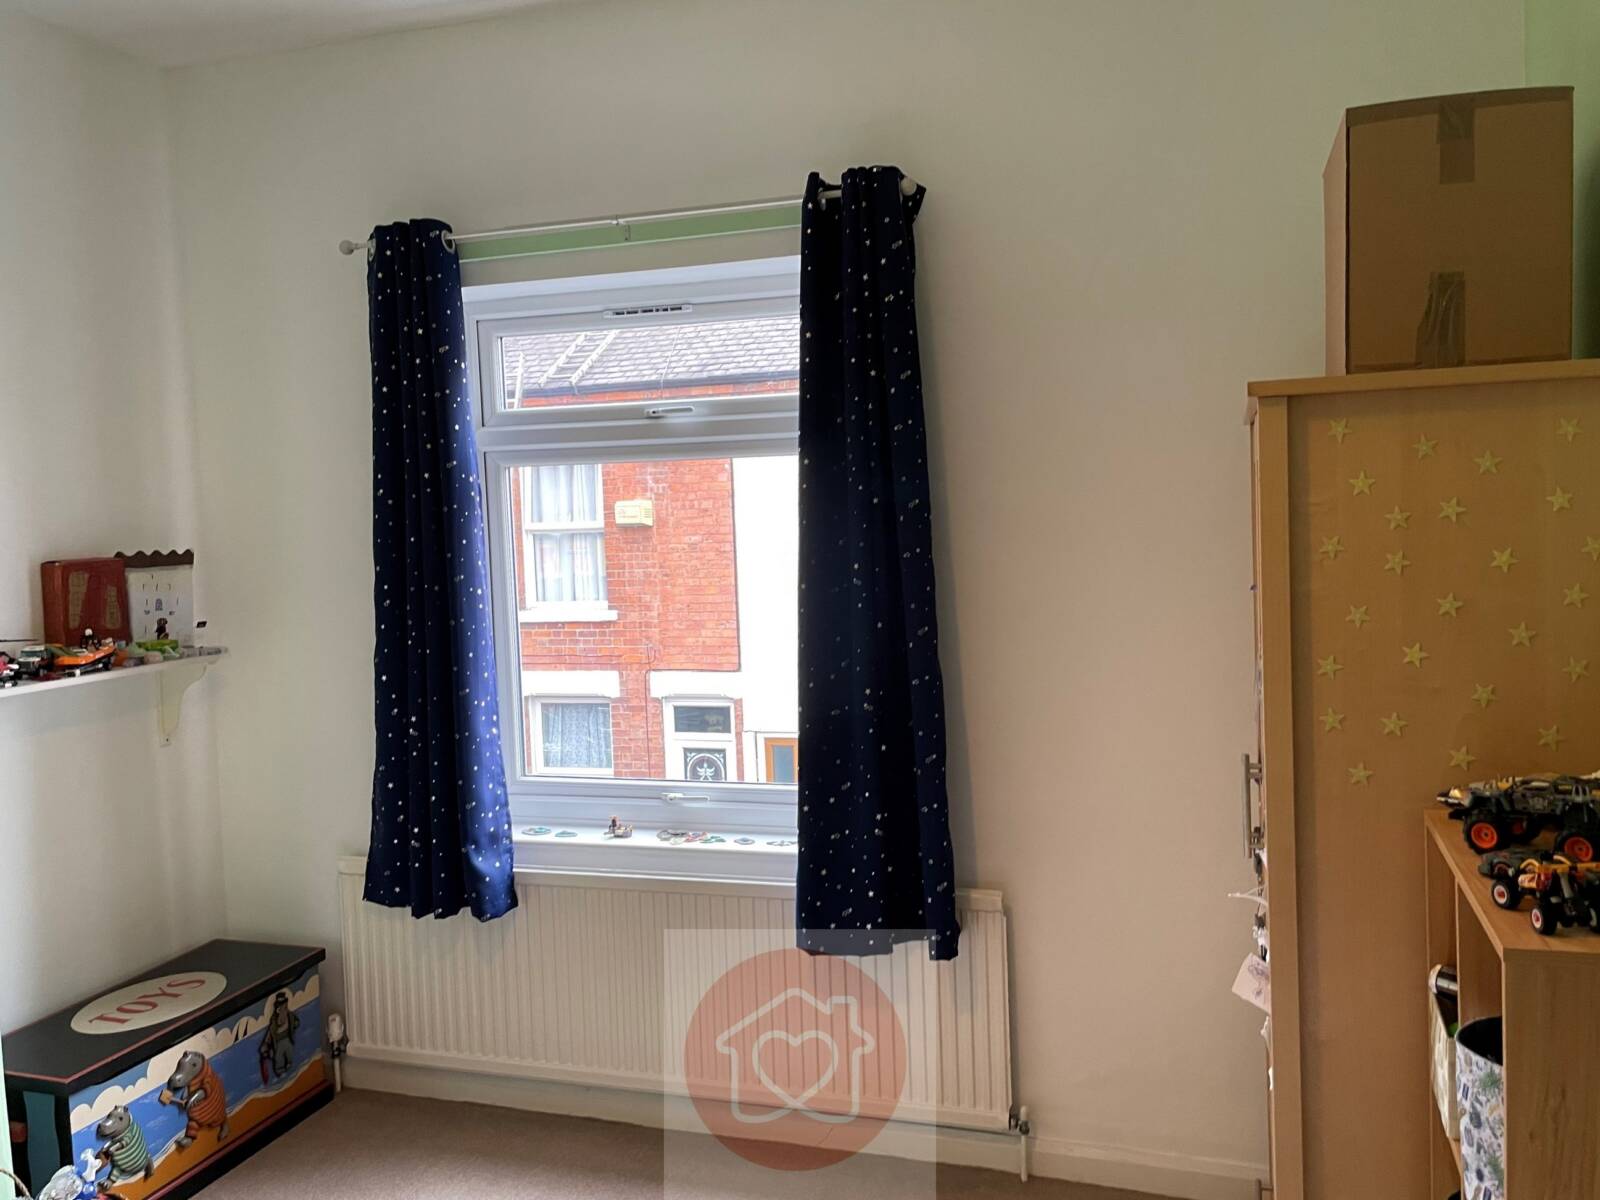 Curzon Street Netherfield – 2 bedroom mid terrace. NO UPWARD CHAIN! GREAT INVESTMENT OR STARTER HOME  A very well presented two-bedroom mid-terrace home creating an ideal investment opportunity or first time buy for those looking to step on the property ladder.